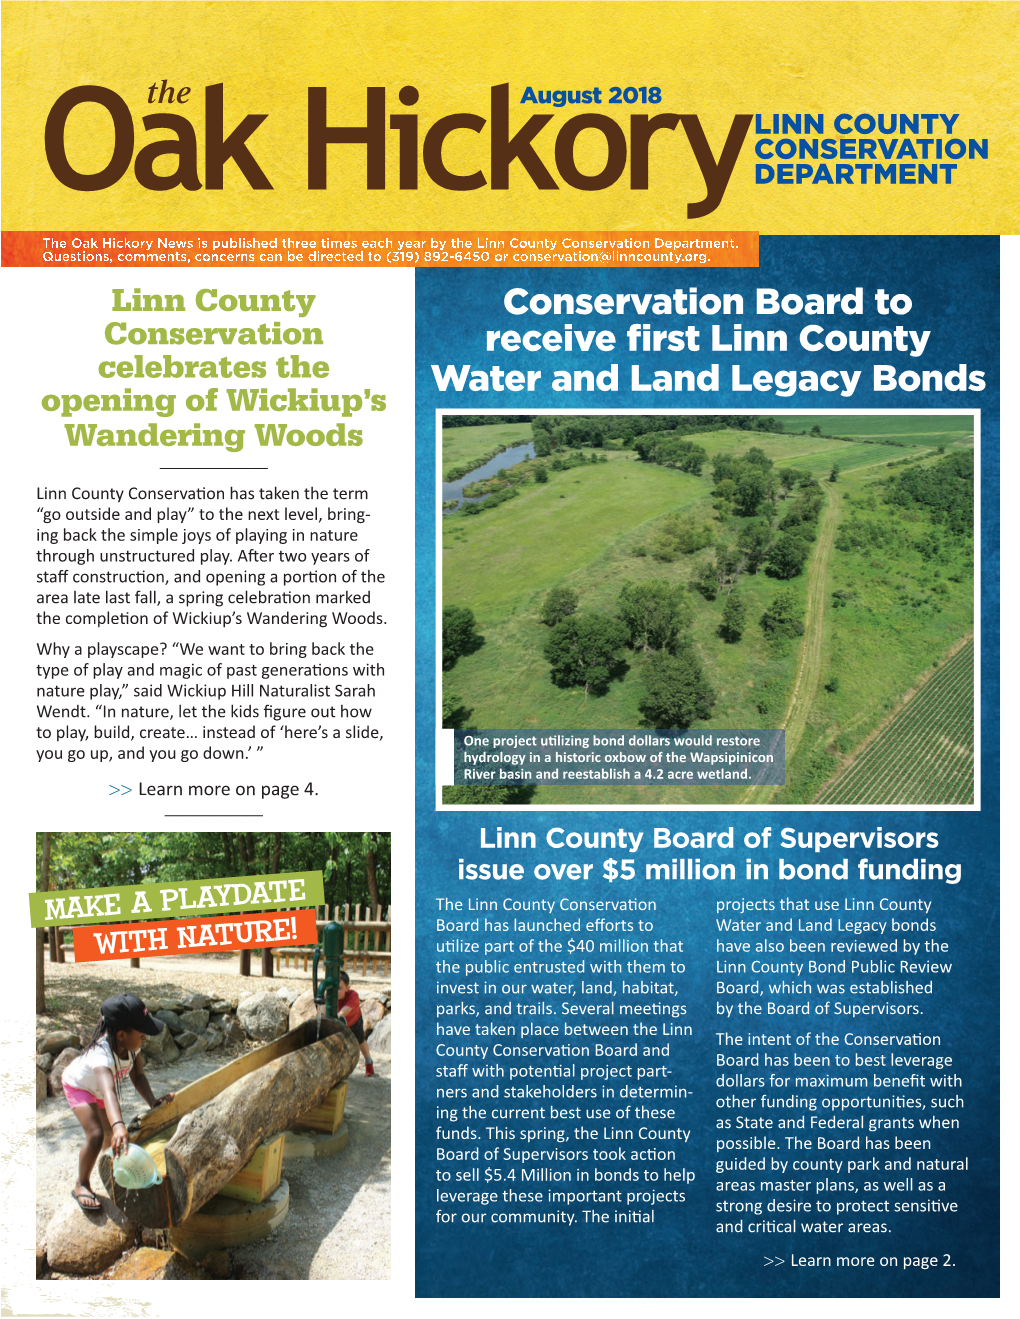 August Issue of the Oak Hickory